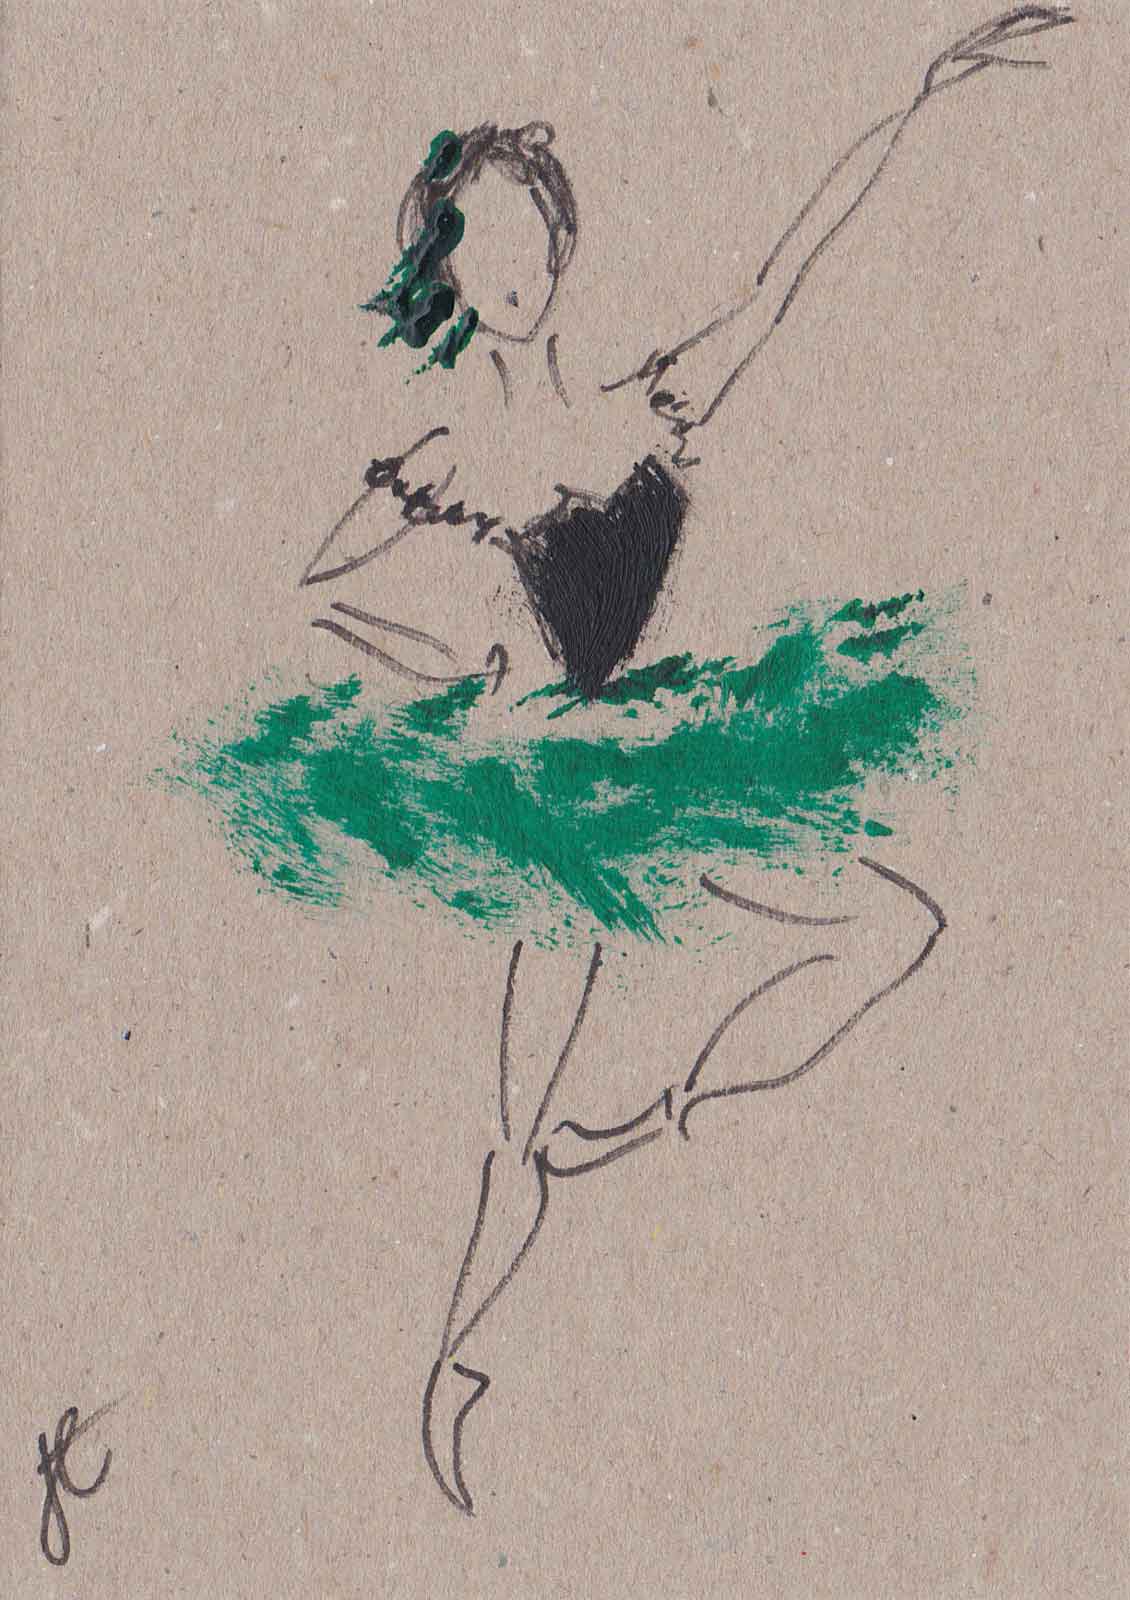 Light-footed – hand-painted ballerina note card